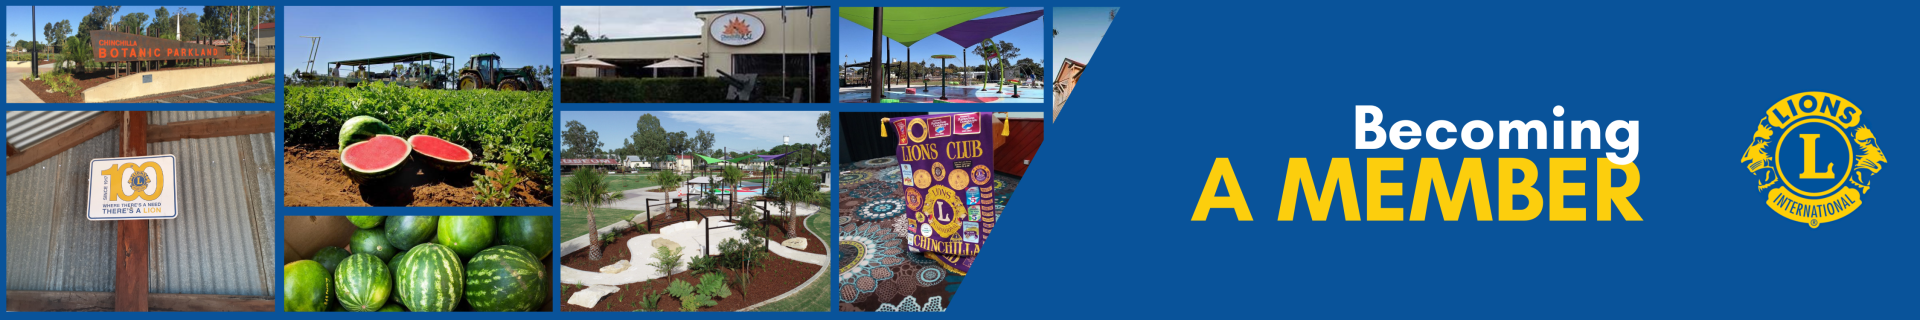 Lions Club Chinchilla Becoming a Member Banner